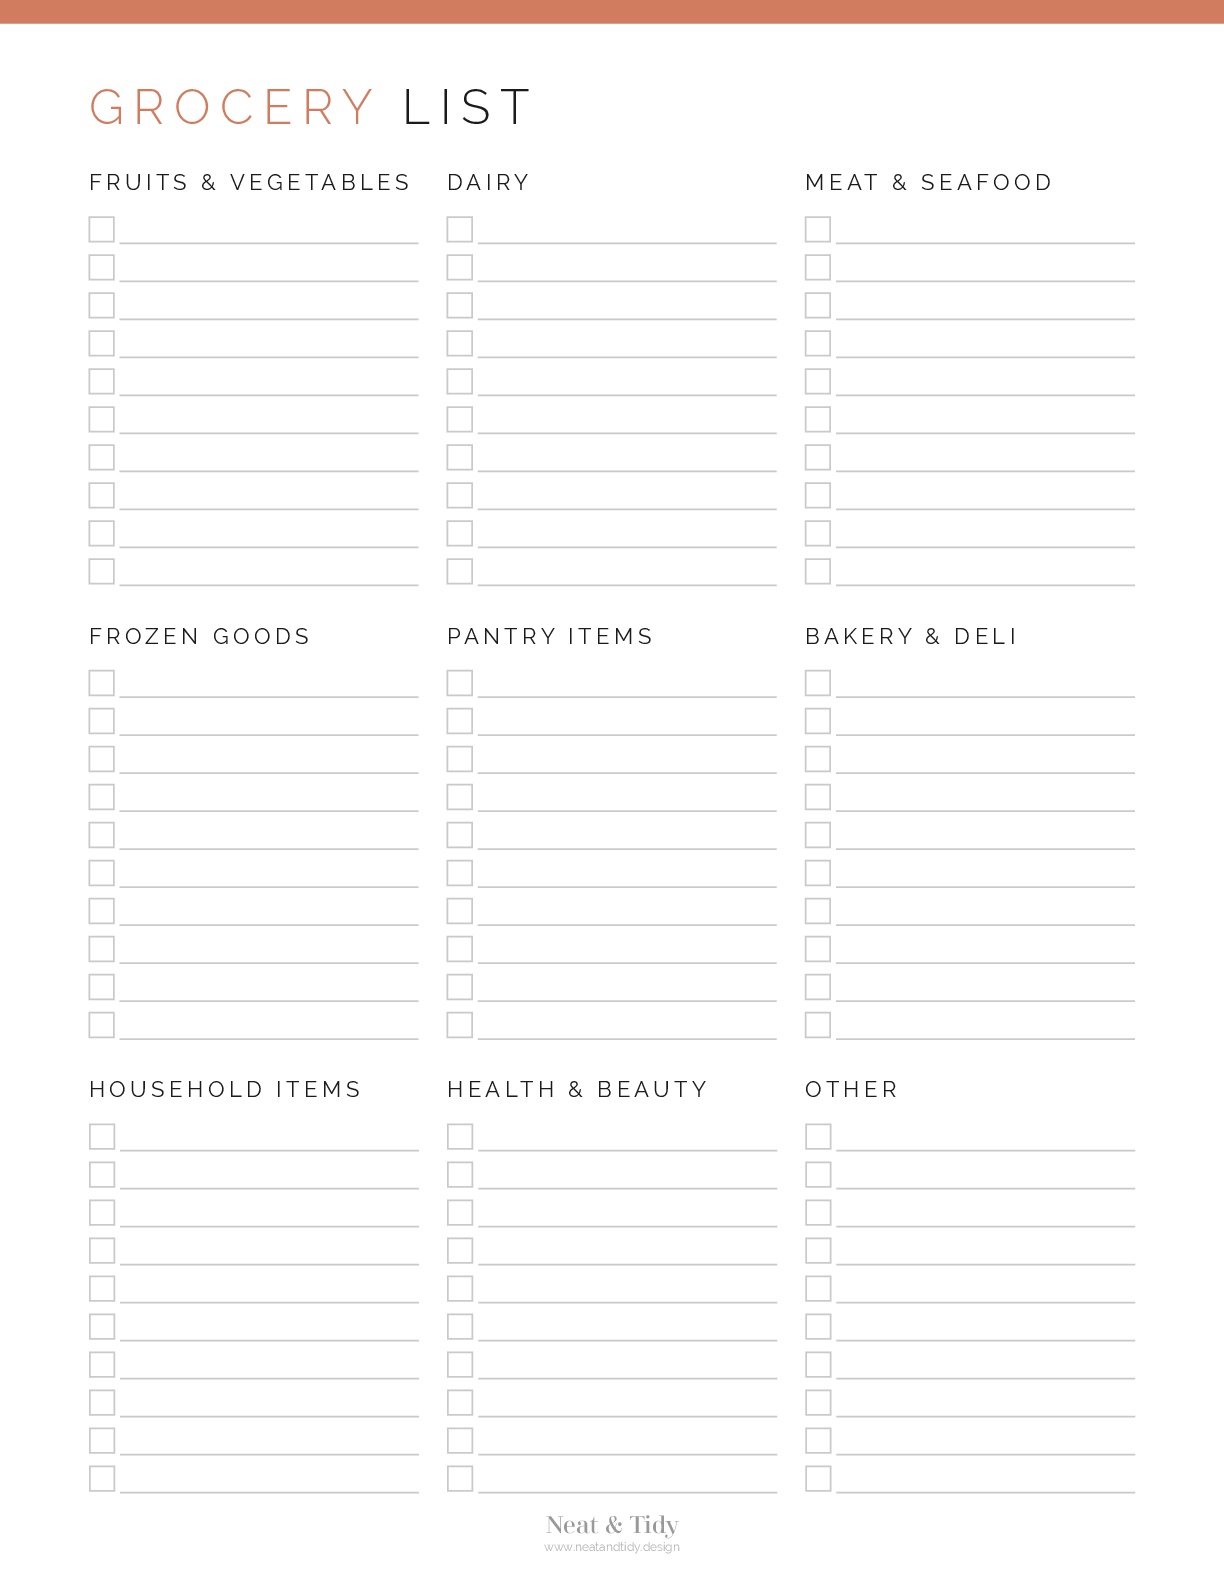 Grocery List With Categories Neat And Tidy Design